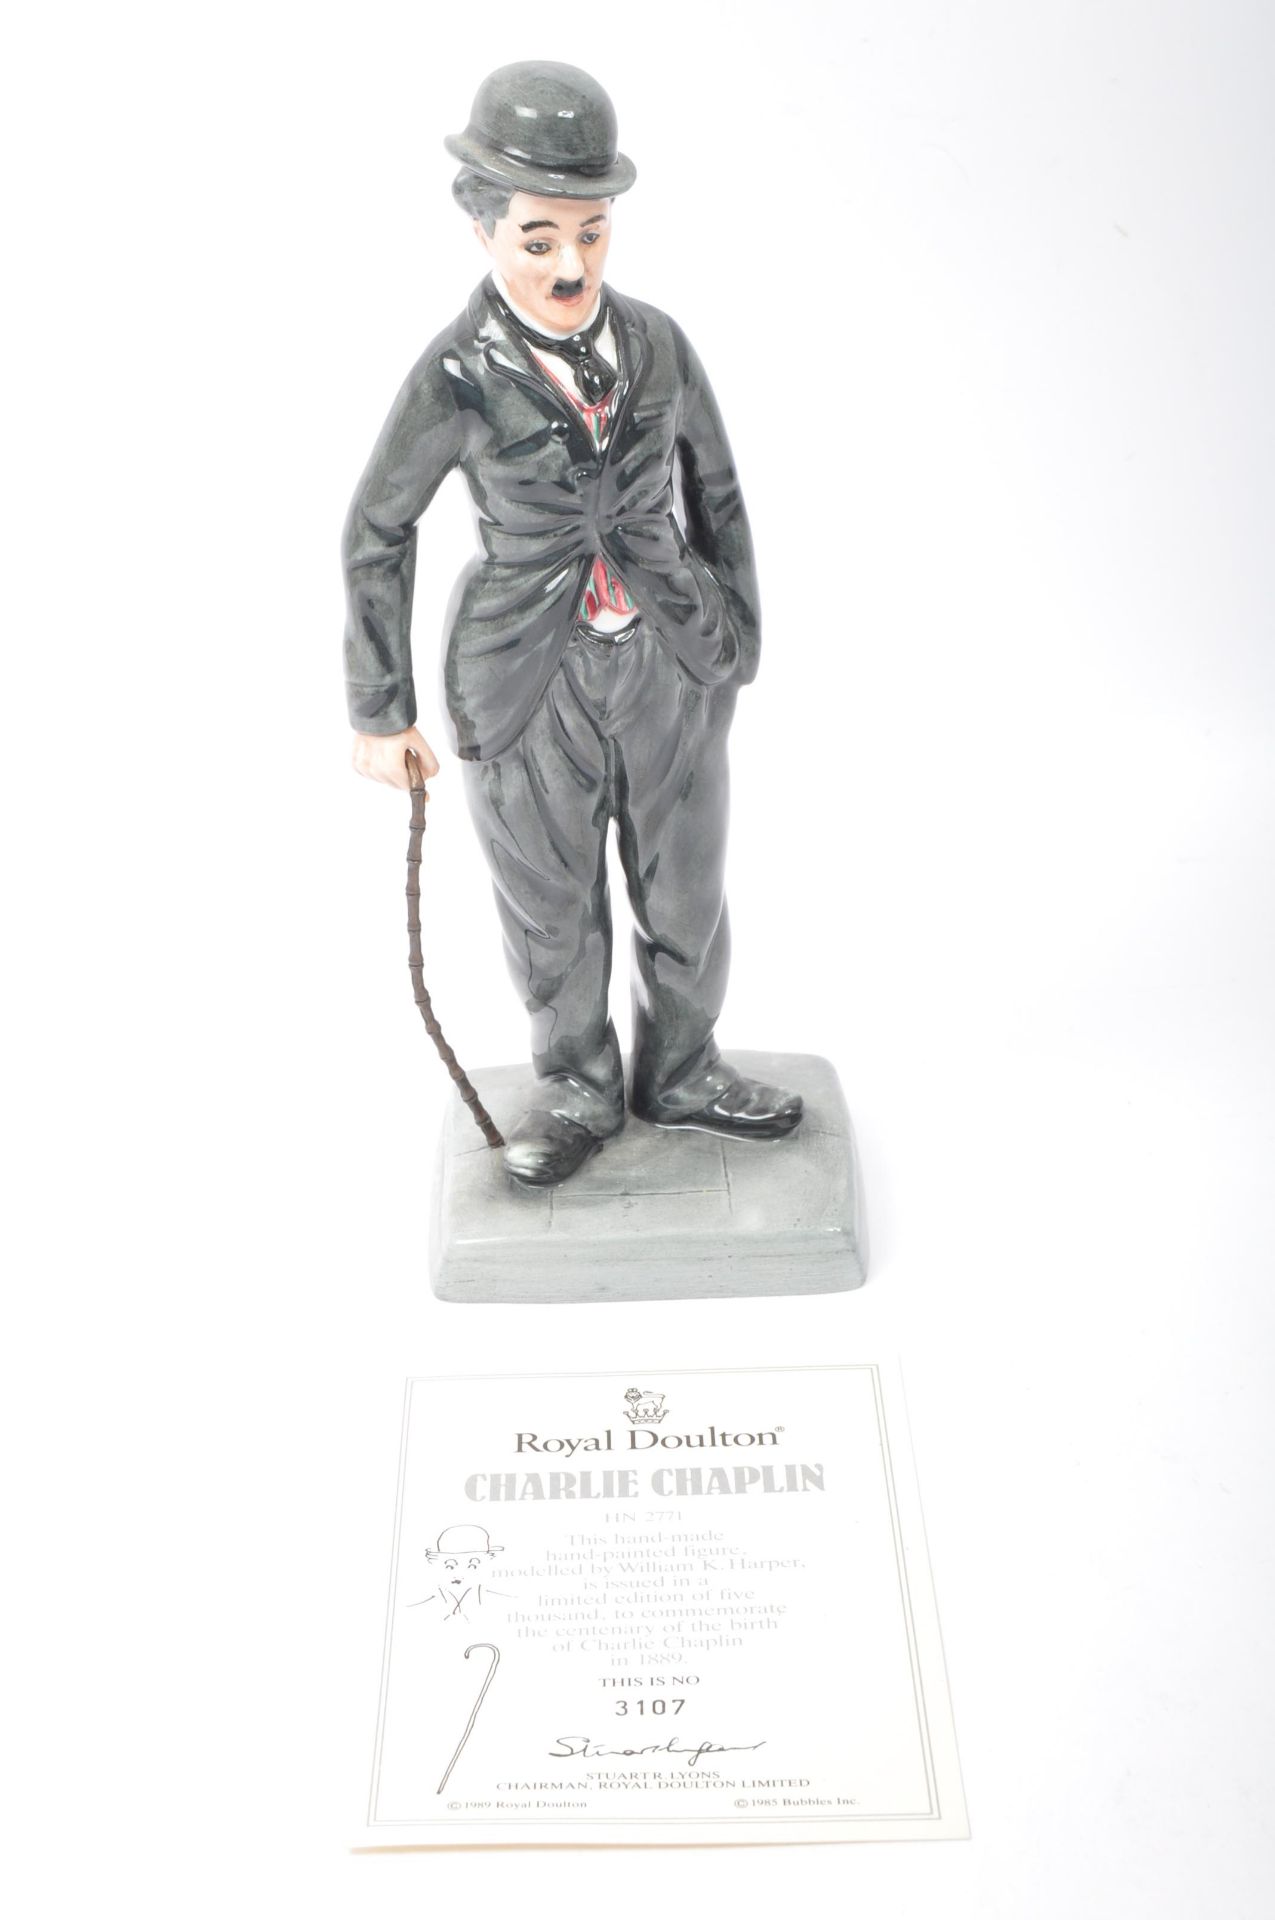 ROYAL DOULTON LIMITED EDITION CHARLIE CHAPLIN FIGURE - Image 2 of 5